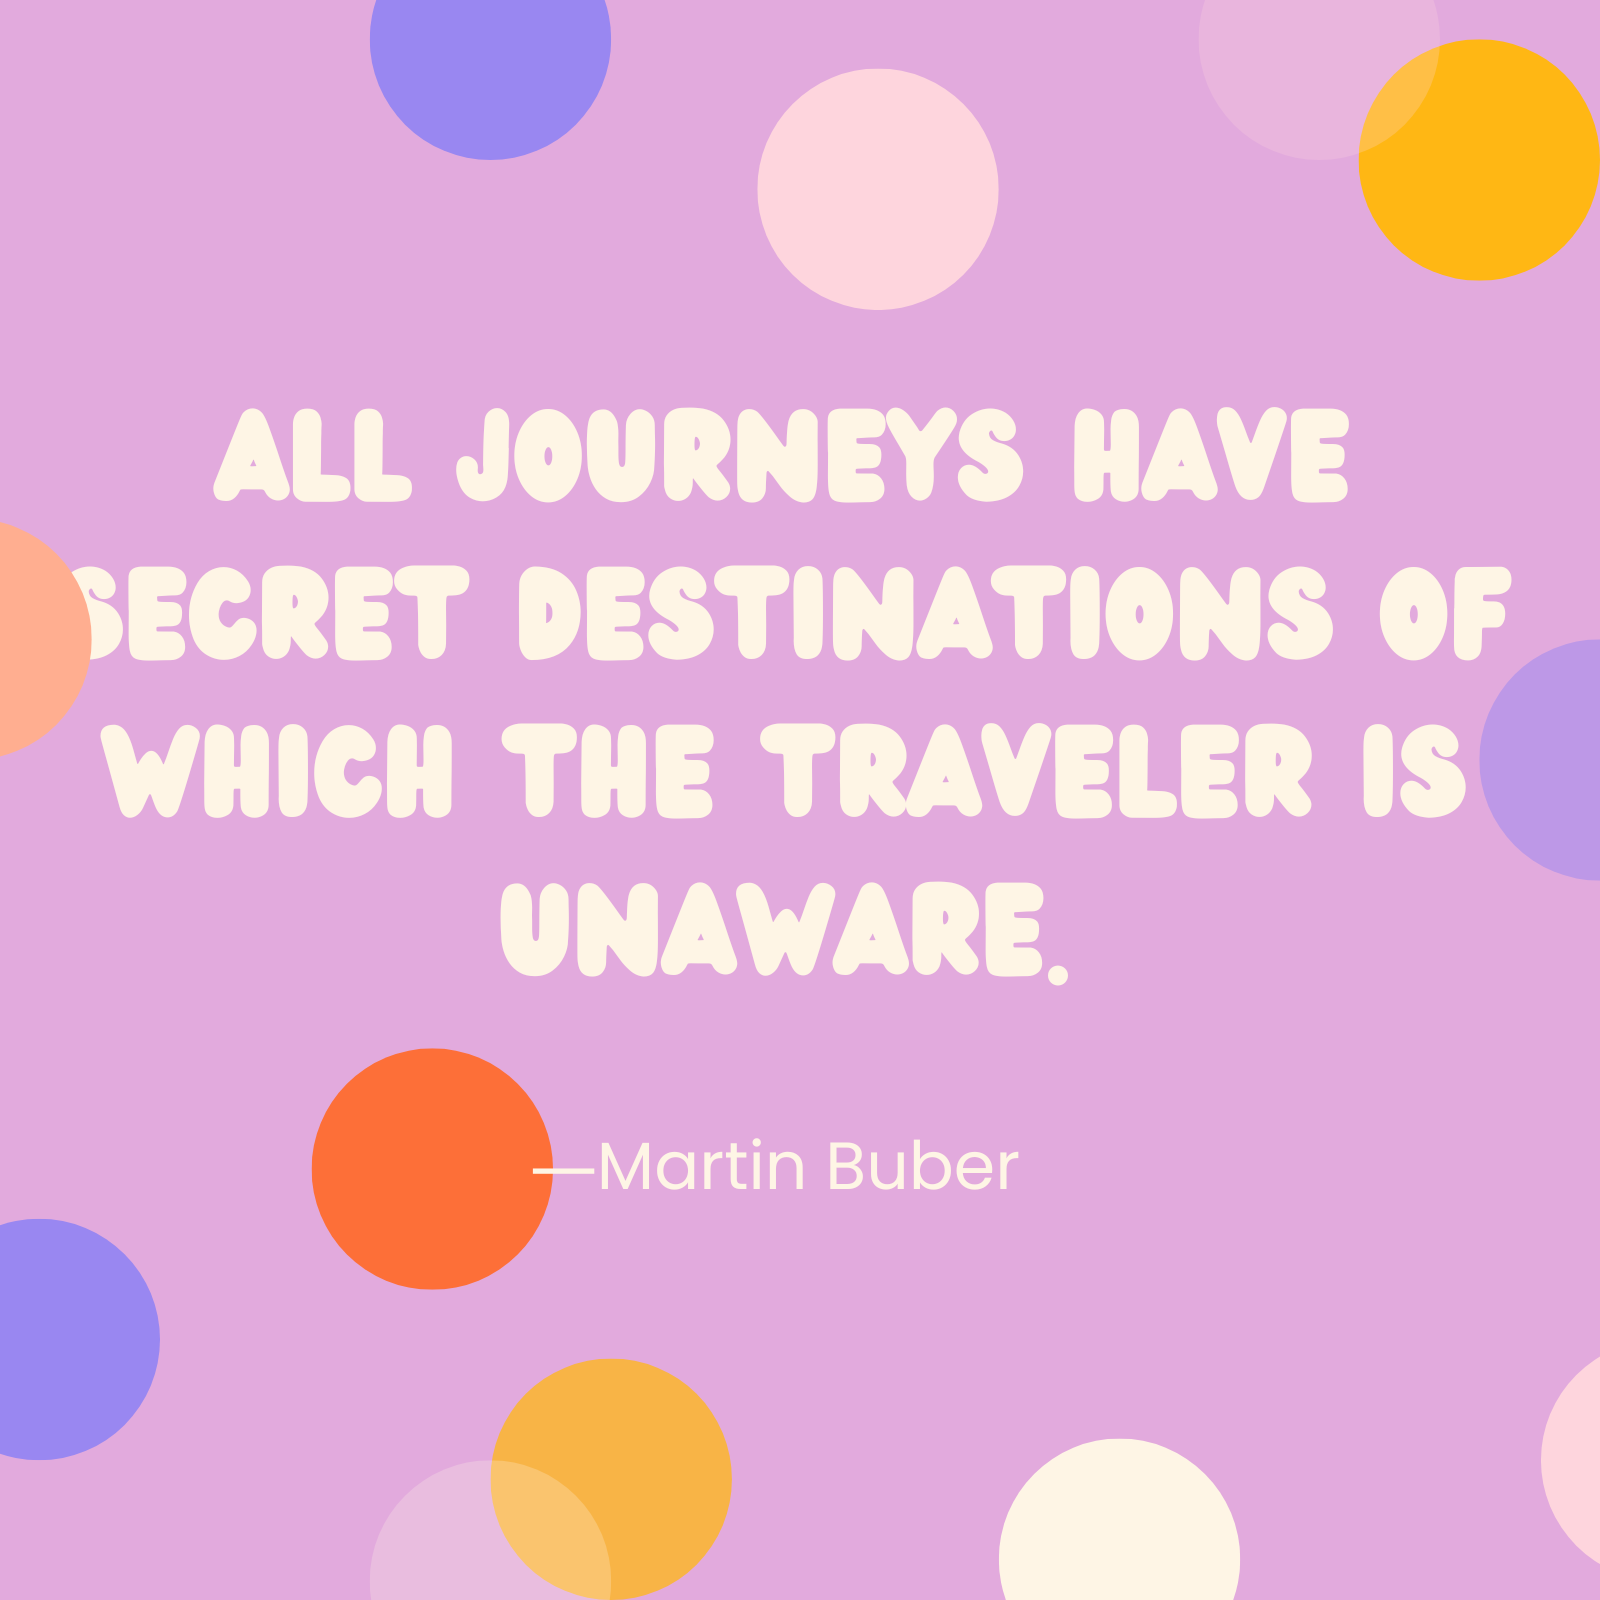 <p>"All journeys have secret destinations of which the traveler is unaware." —Martin Buber </p>